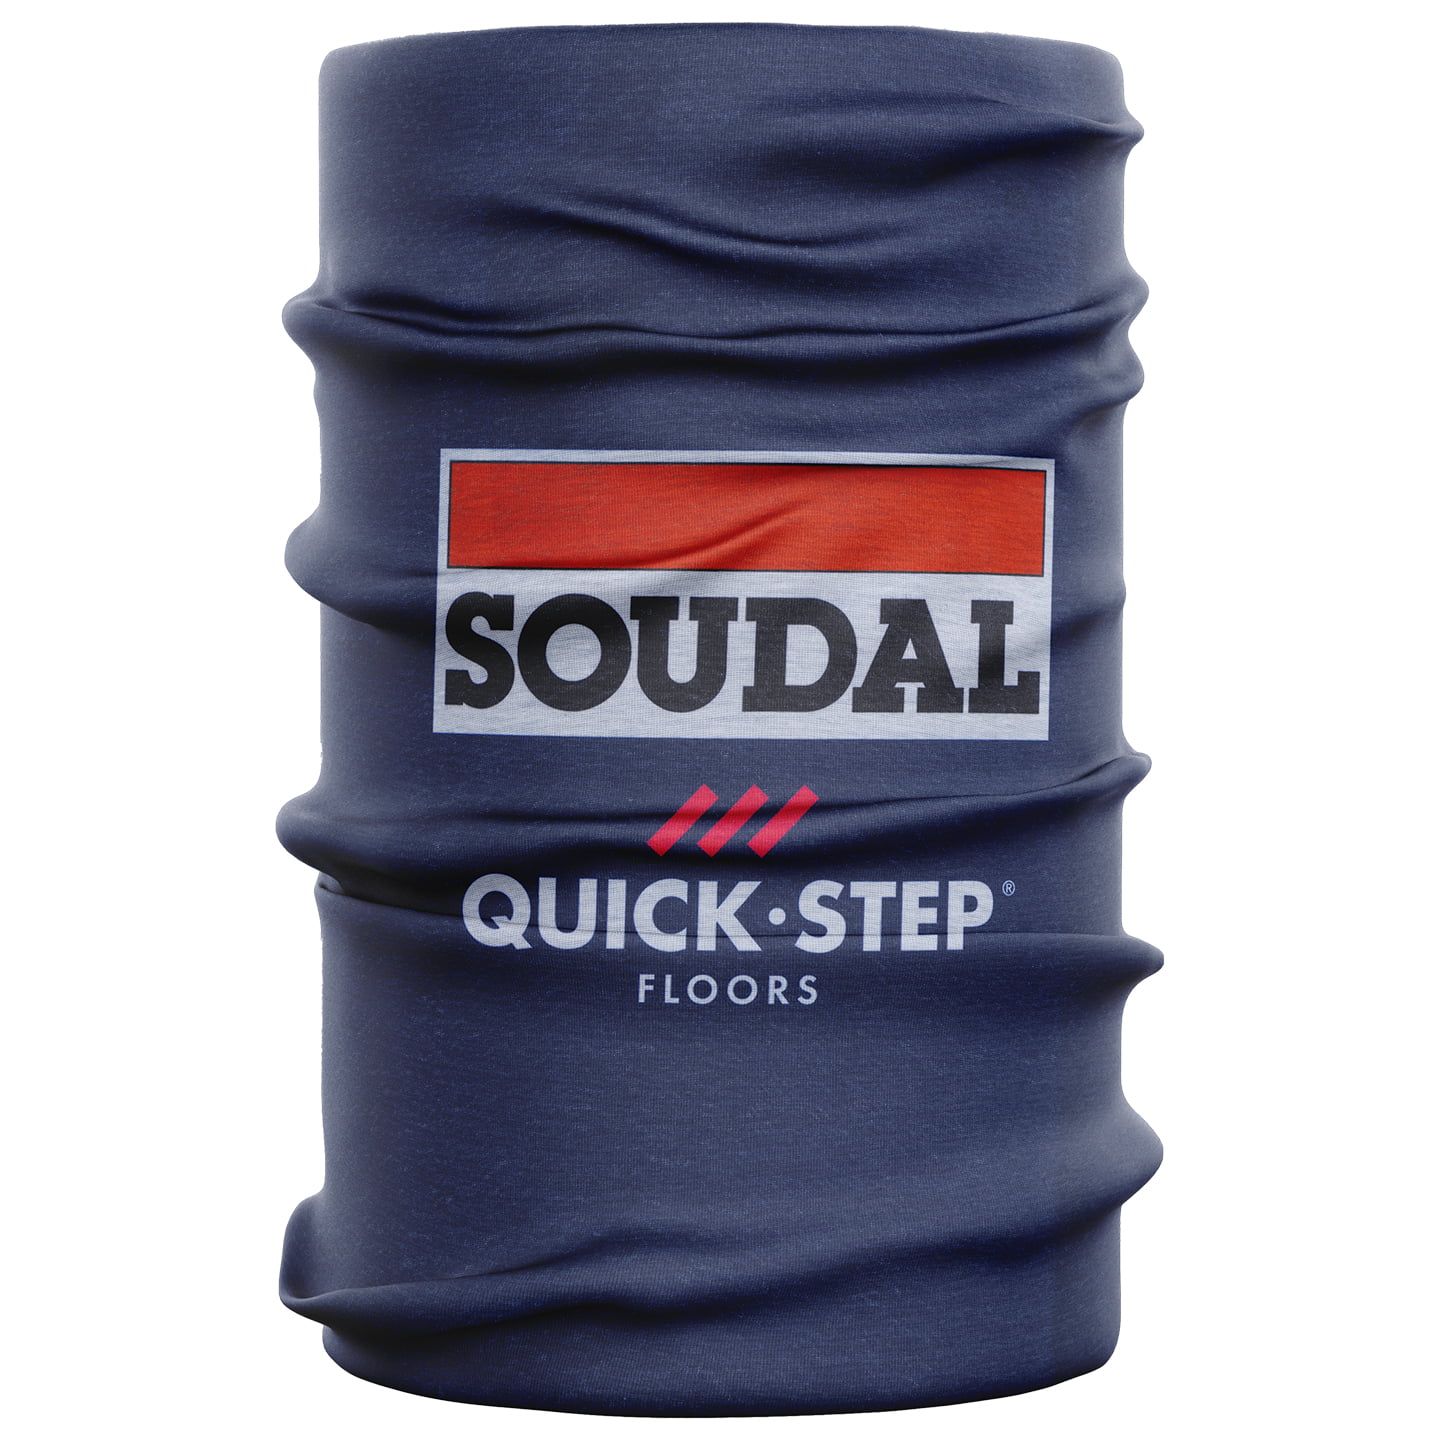 SOUDAL QUICK-STEP Multifunctional Headwear 2024, for men, Cycling clothing